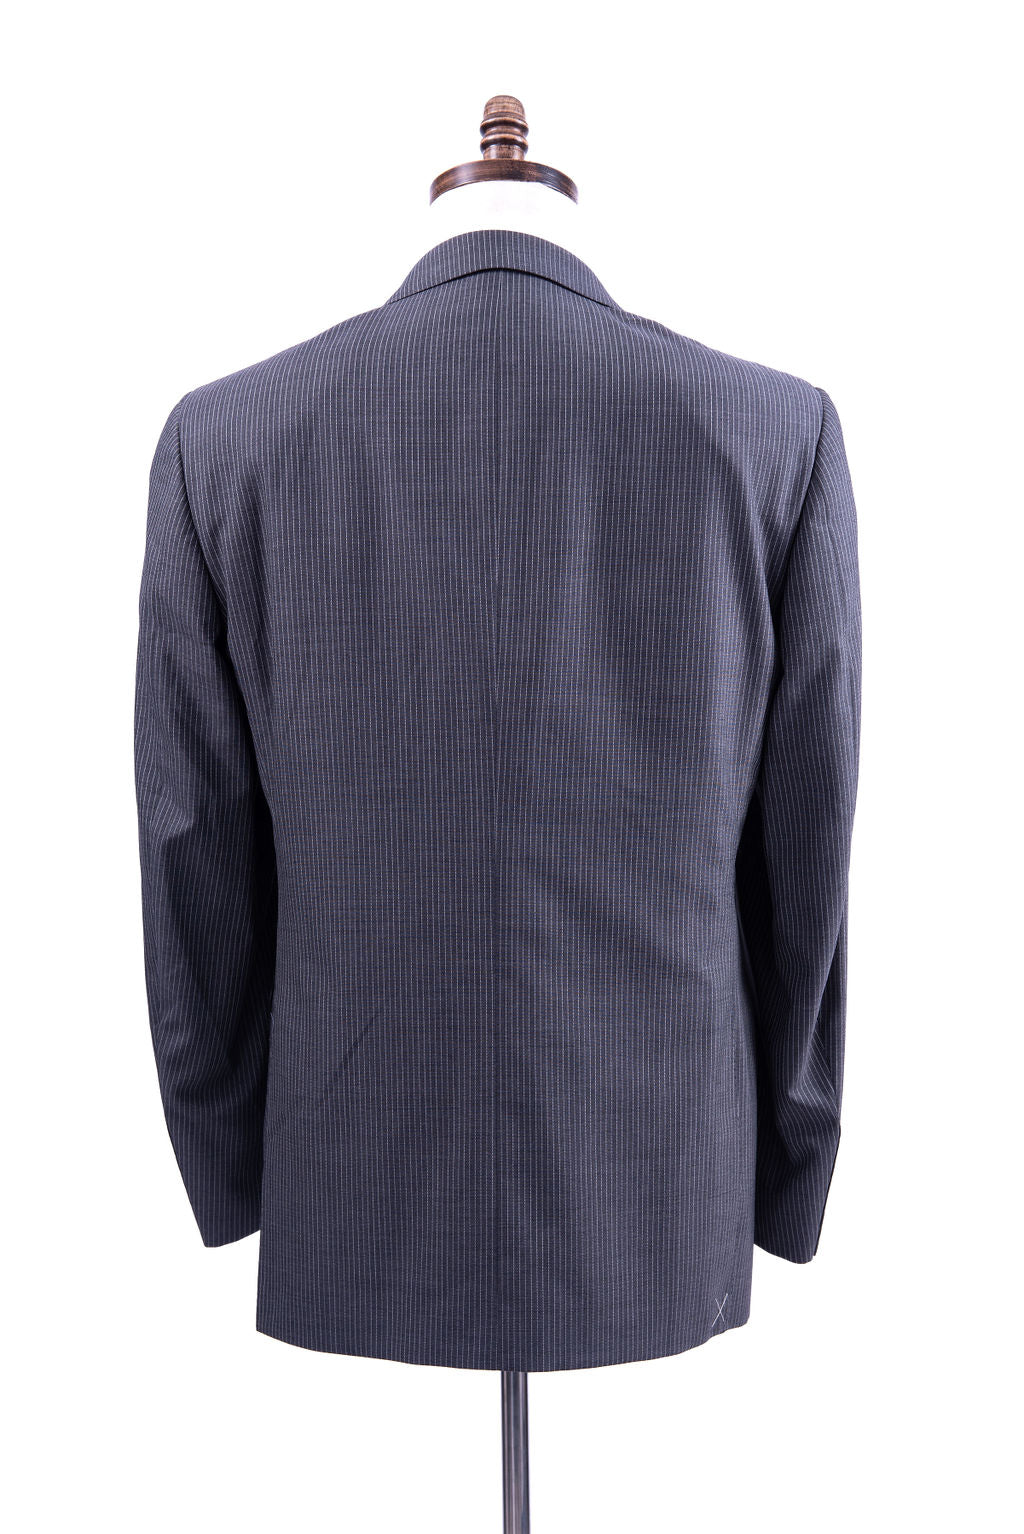 Canali 1934 Mens Gray Pinstriped 42R Drop 6 100% Wool 2 Button 2 Piece Suit